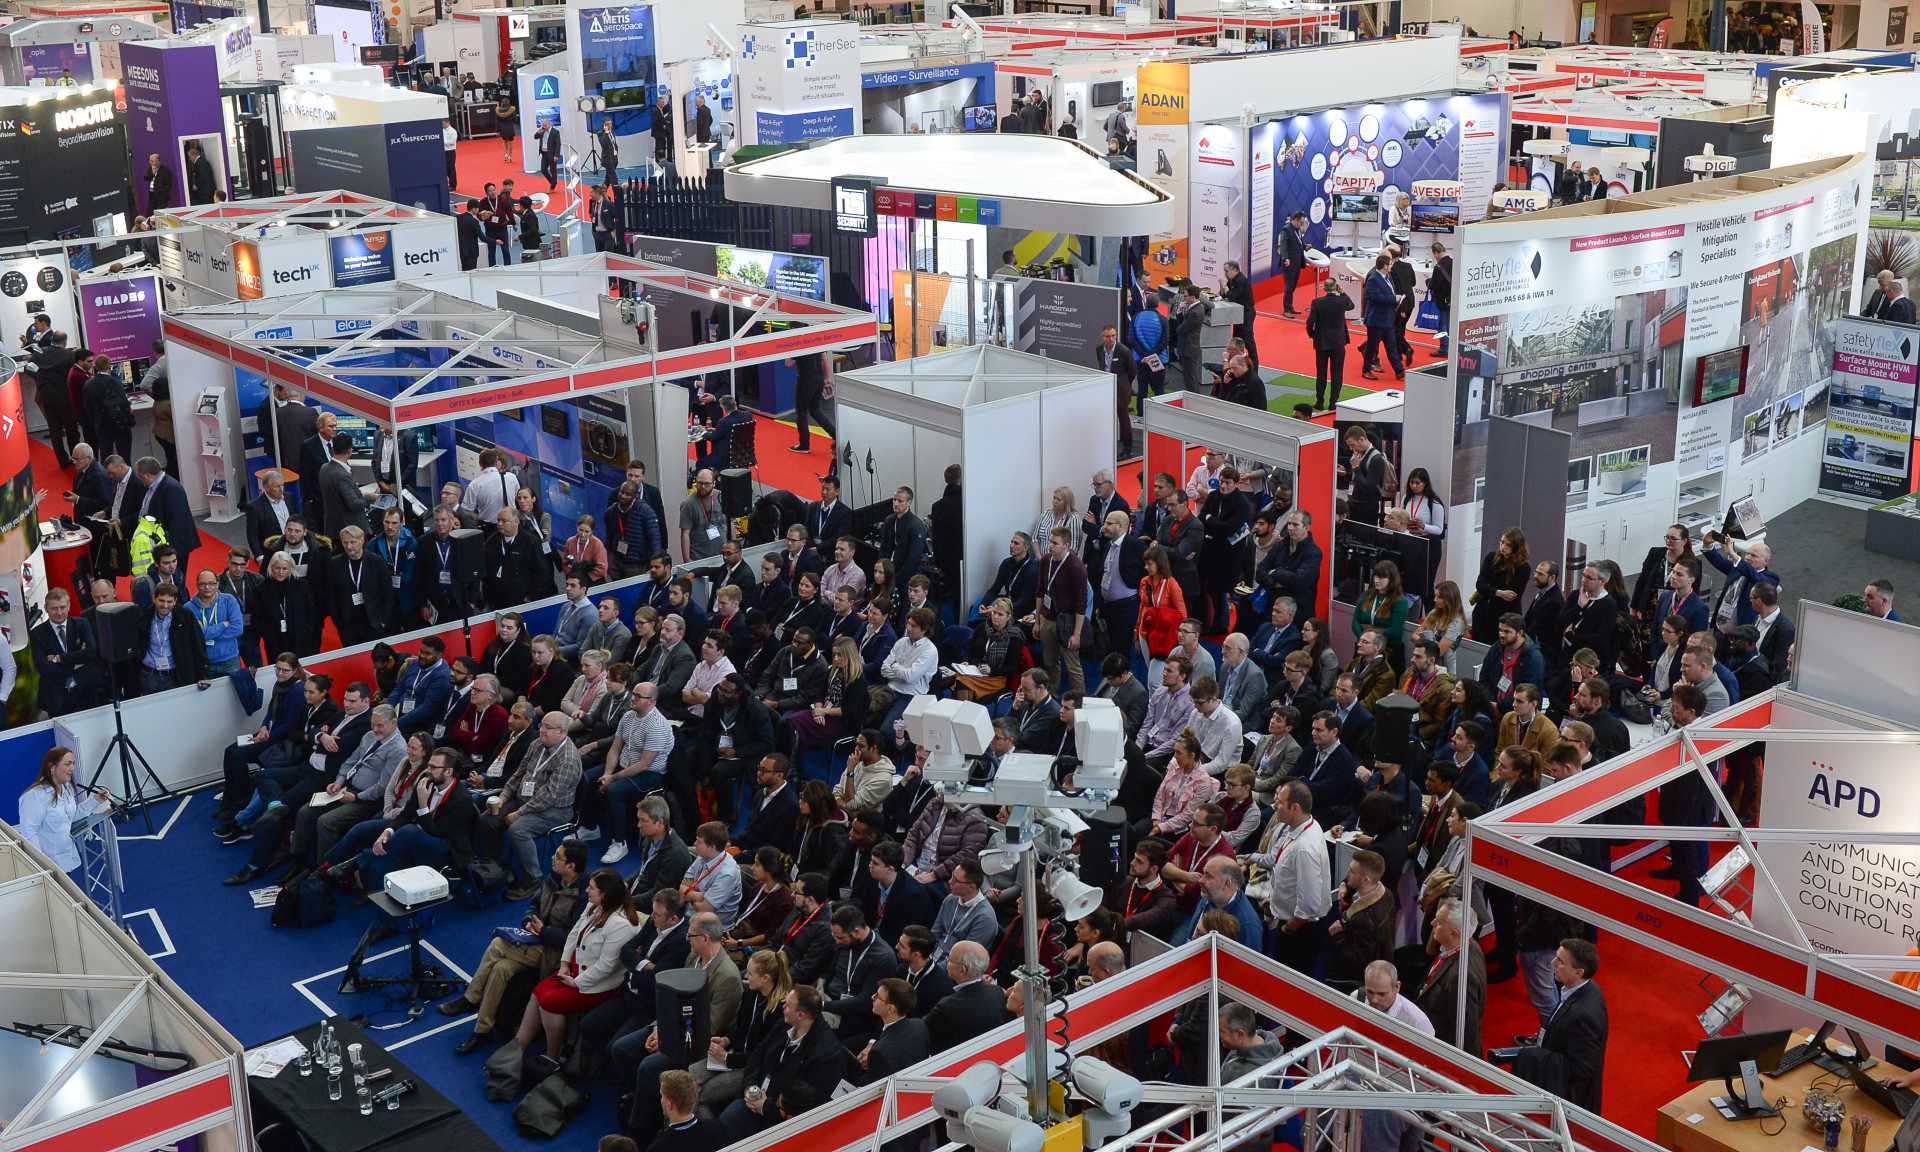 Hear from world-class experts at International Security Expo